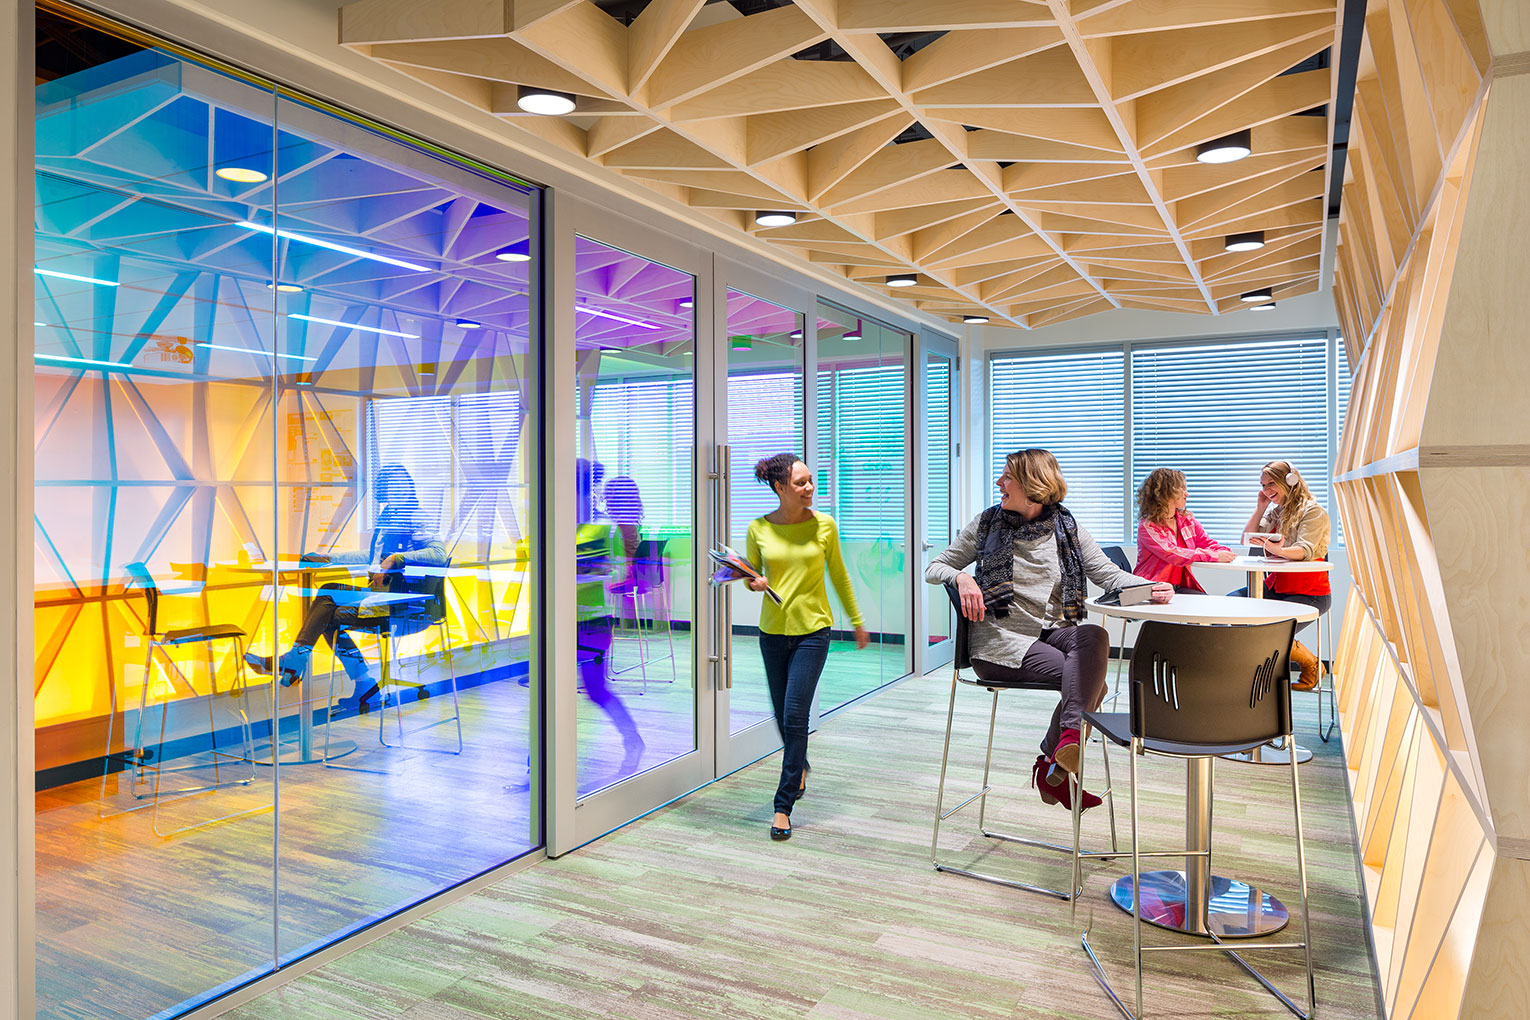 CD Baby Headquarters. Hallway with bistro-type tables for collaboration or quiet work. Multi-colored light reflects off sliding glass doors on the left. Ceiling and right-side wall are covered with custom woodwork in a geometric pattern. Two women can be seen visiting at the table in the background, and one woman sits at the table in the foreground, greeting a passing co-worker.